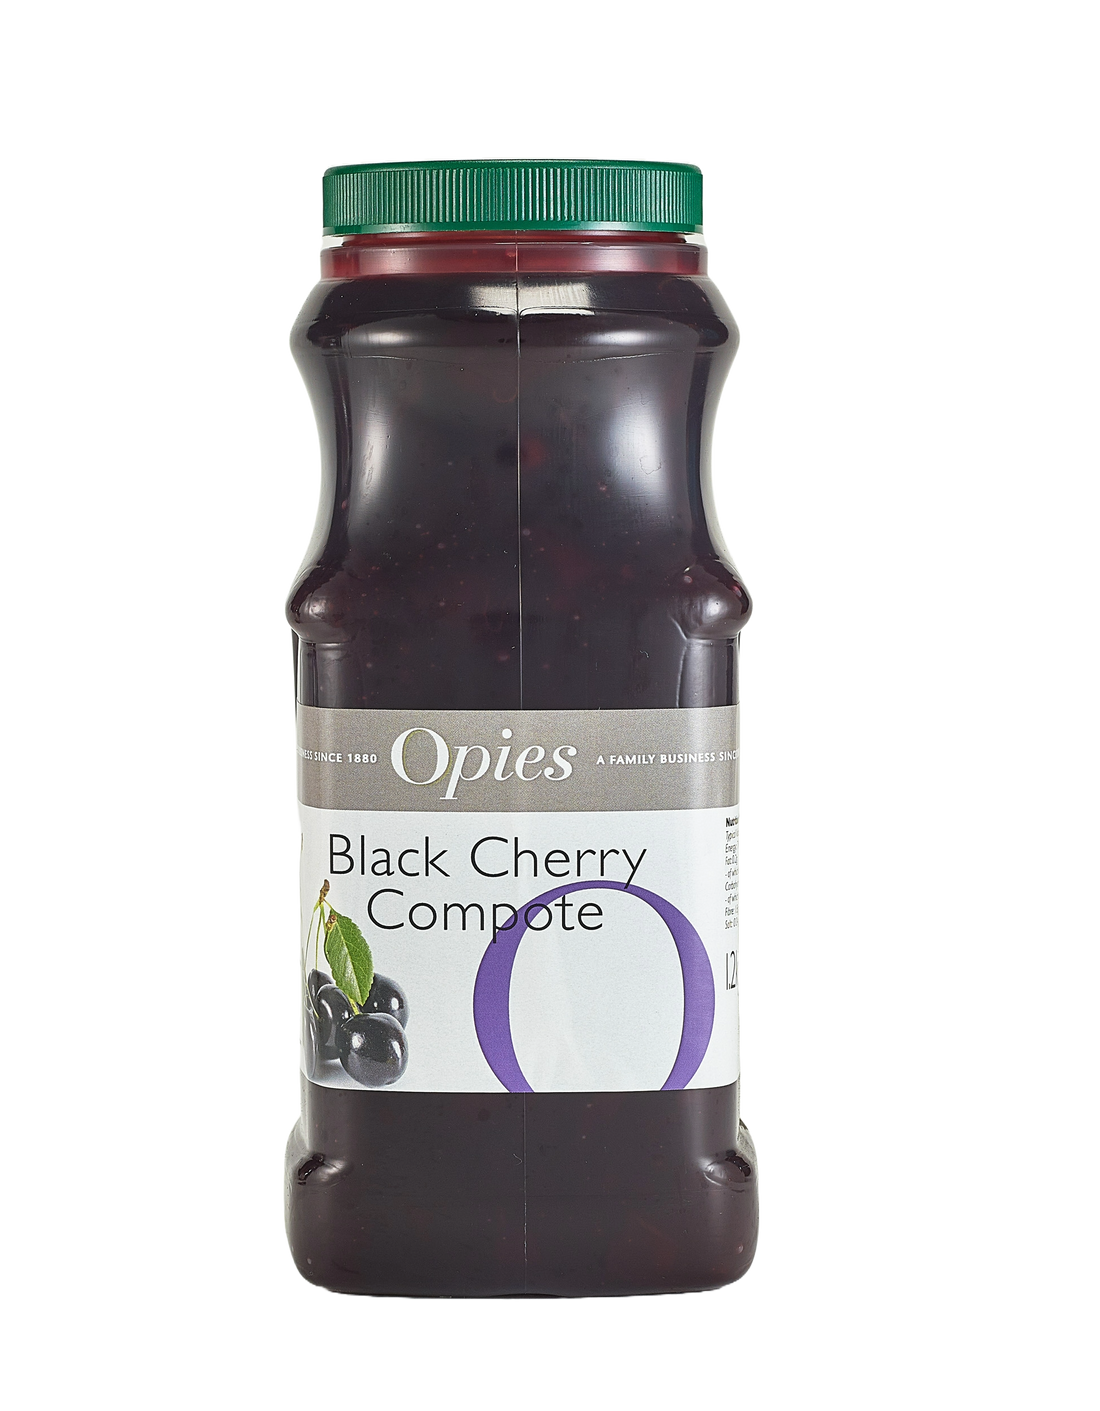 Opies Black Cherry Compote